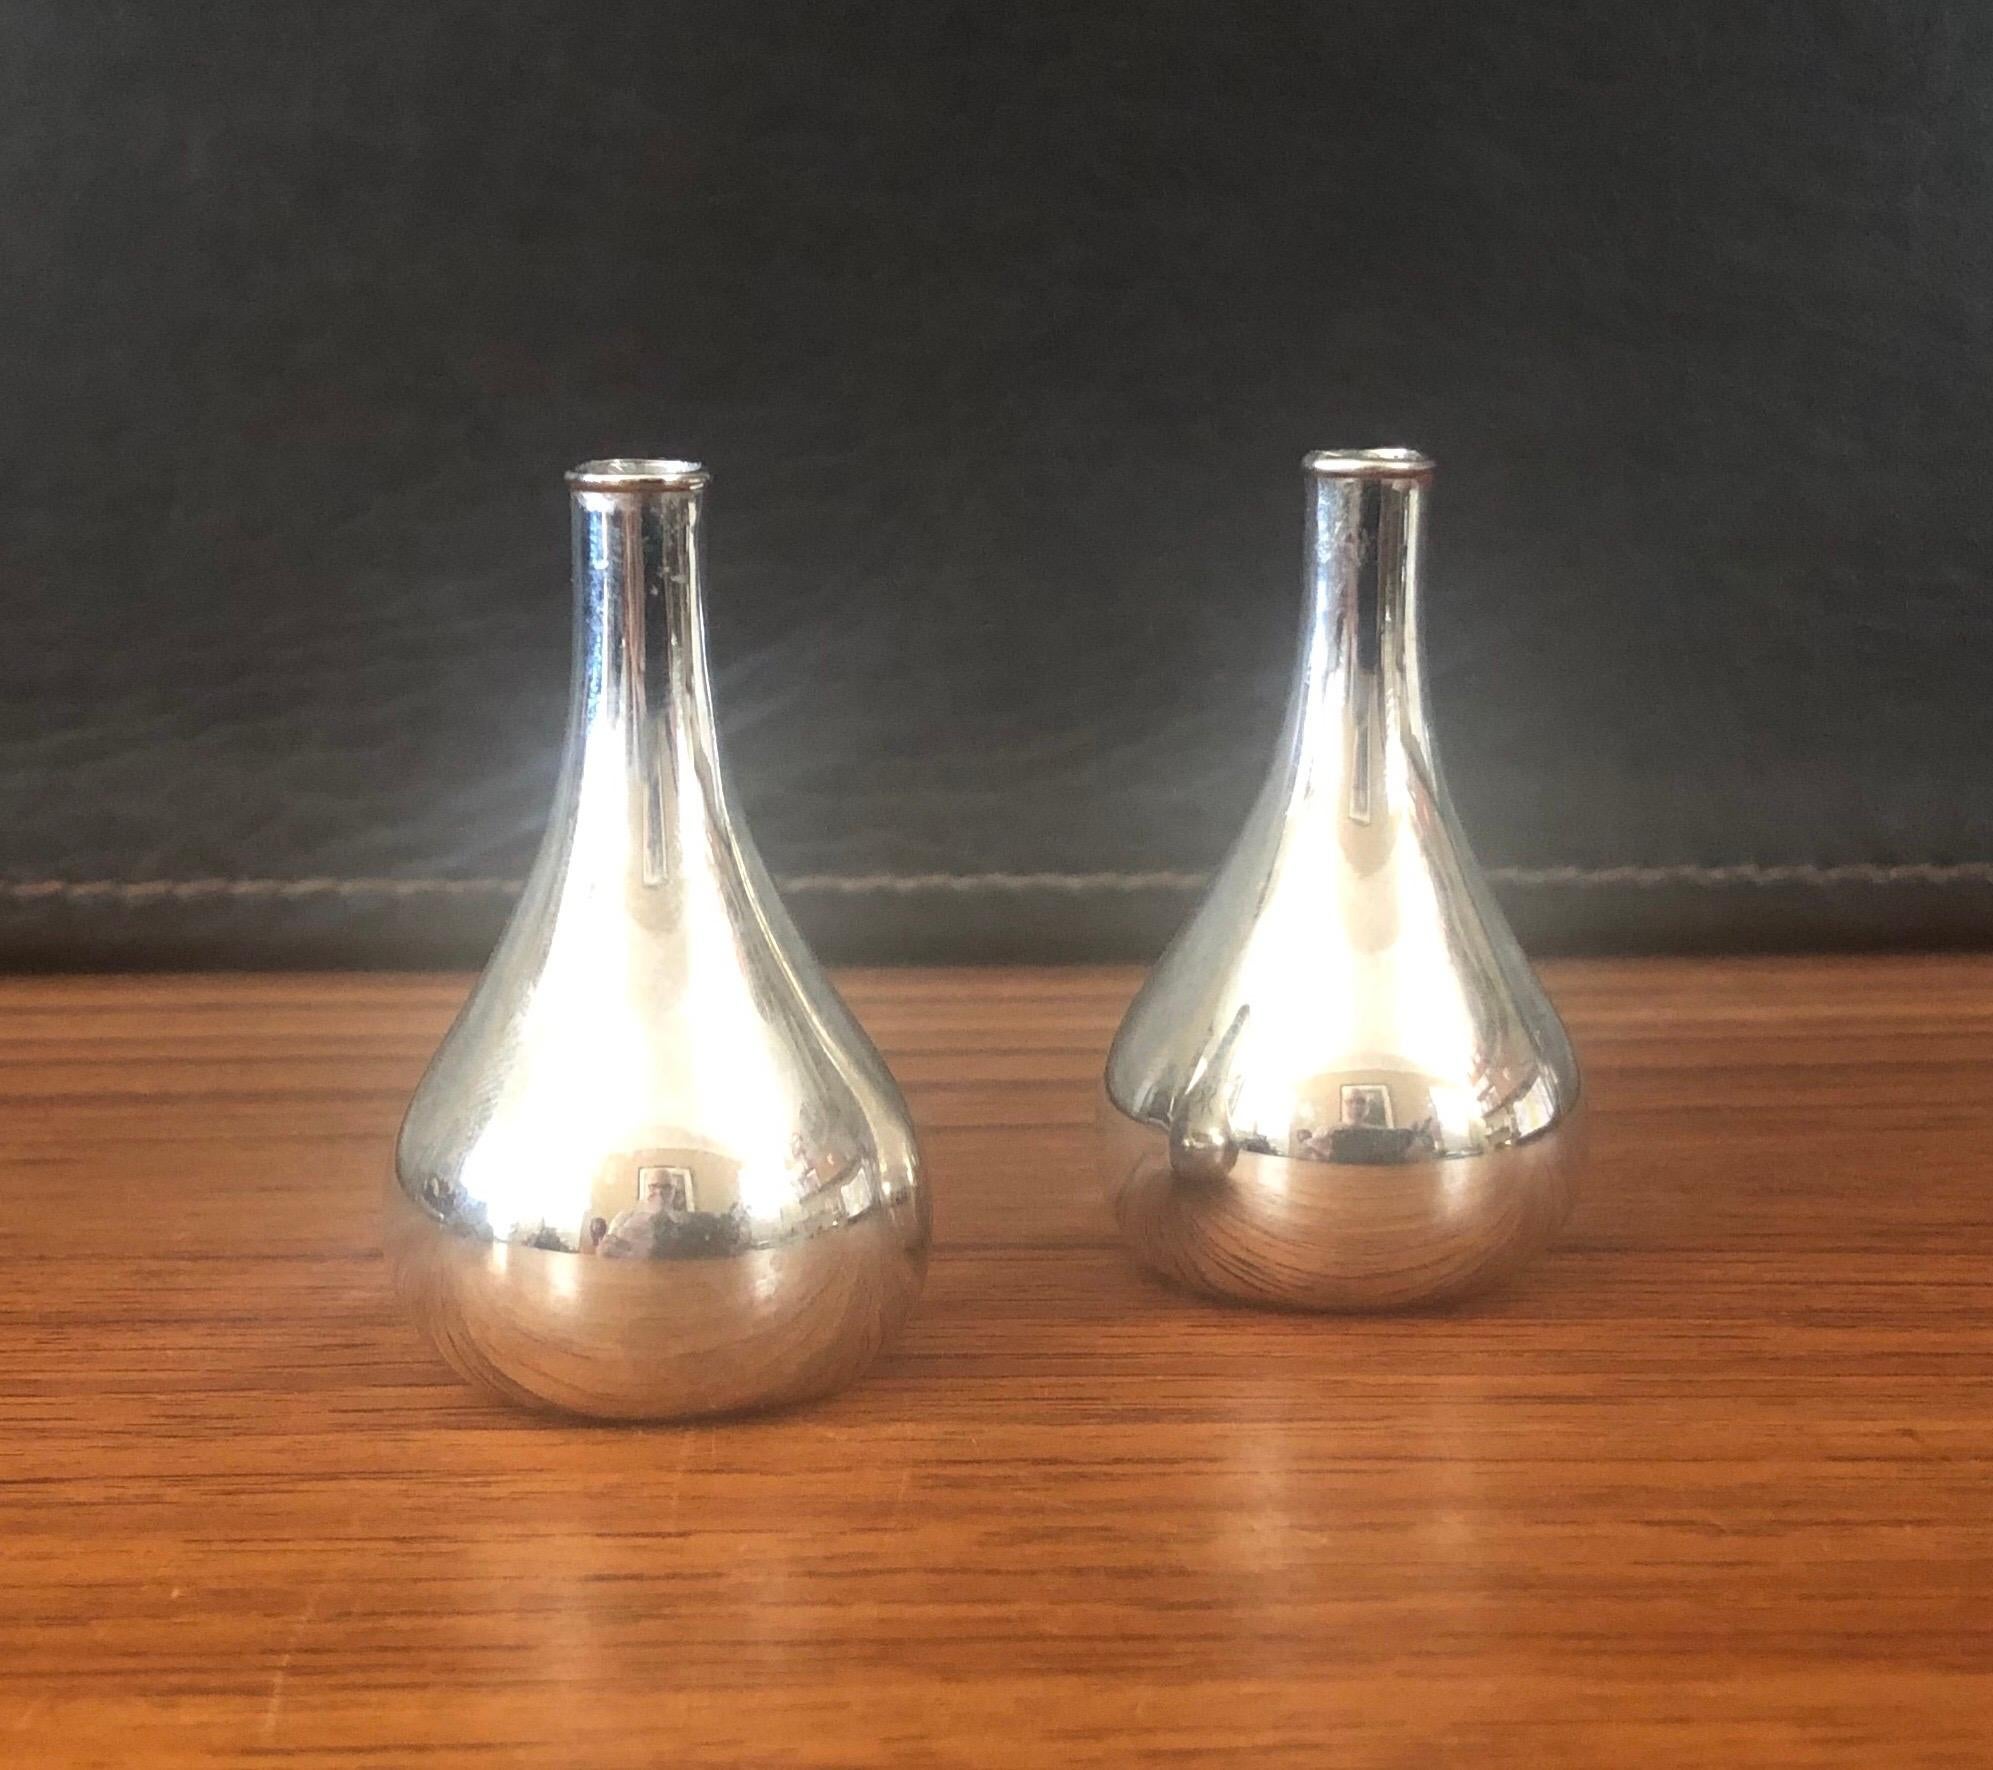 Set of four tear drop candleholders by Jens Quistgaard for Dansk, circa 1990s. They are made of silver plate over metal and support a .25